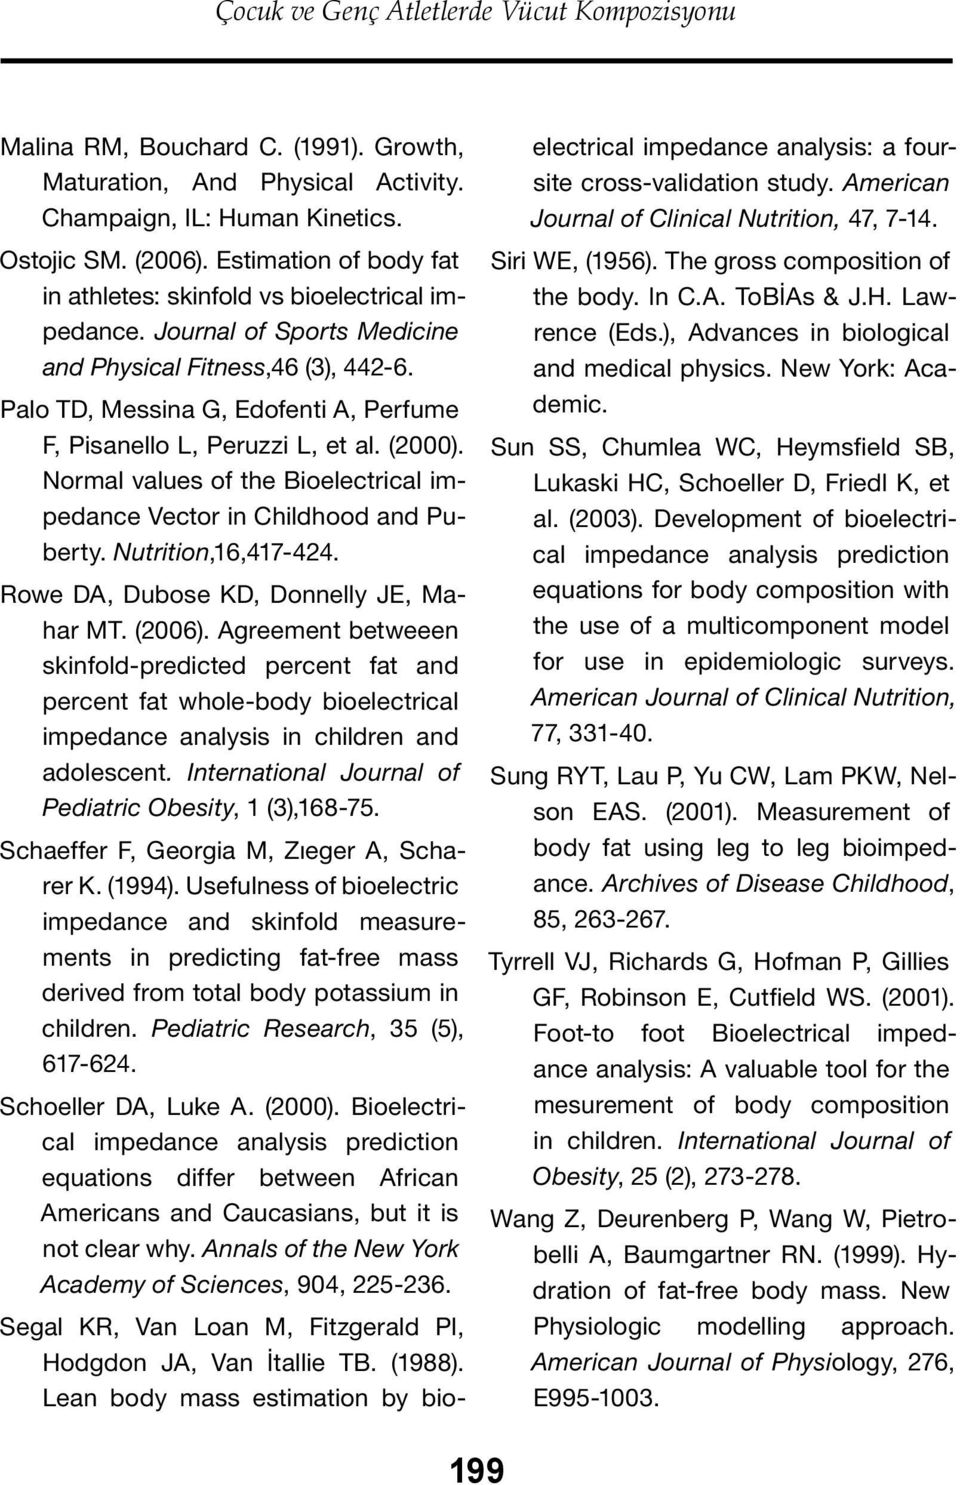 Palo TD, Messina G, Edofenti A, Perfume F, Pisanello L, Peruzzi L, et al. (2000). Normal values of the Bioelectrical impedance Vector in Childhood and Puberty. Nutrition,16,417-424.